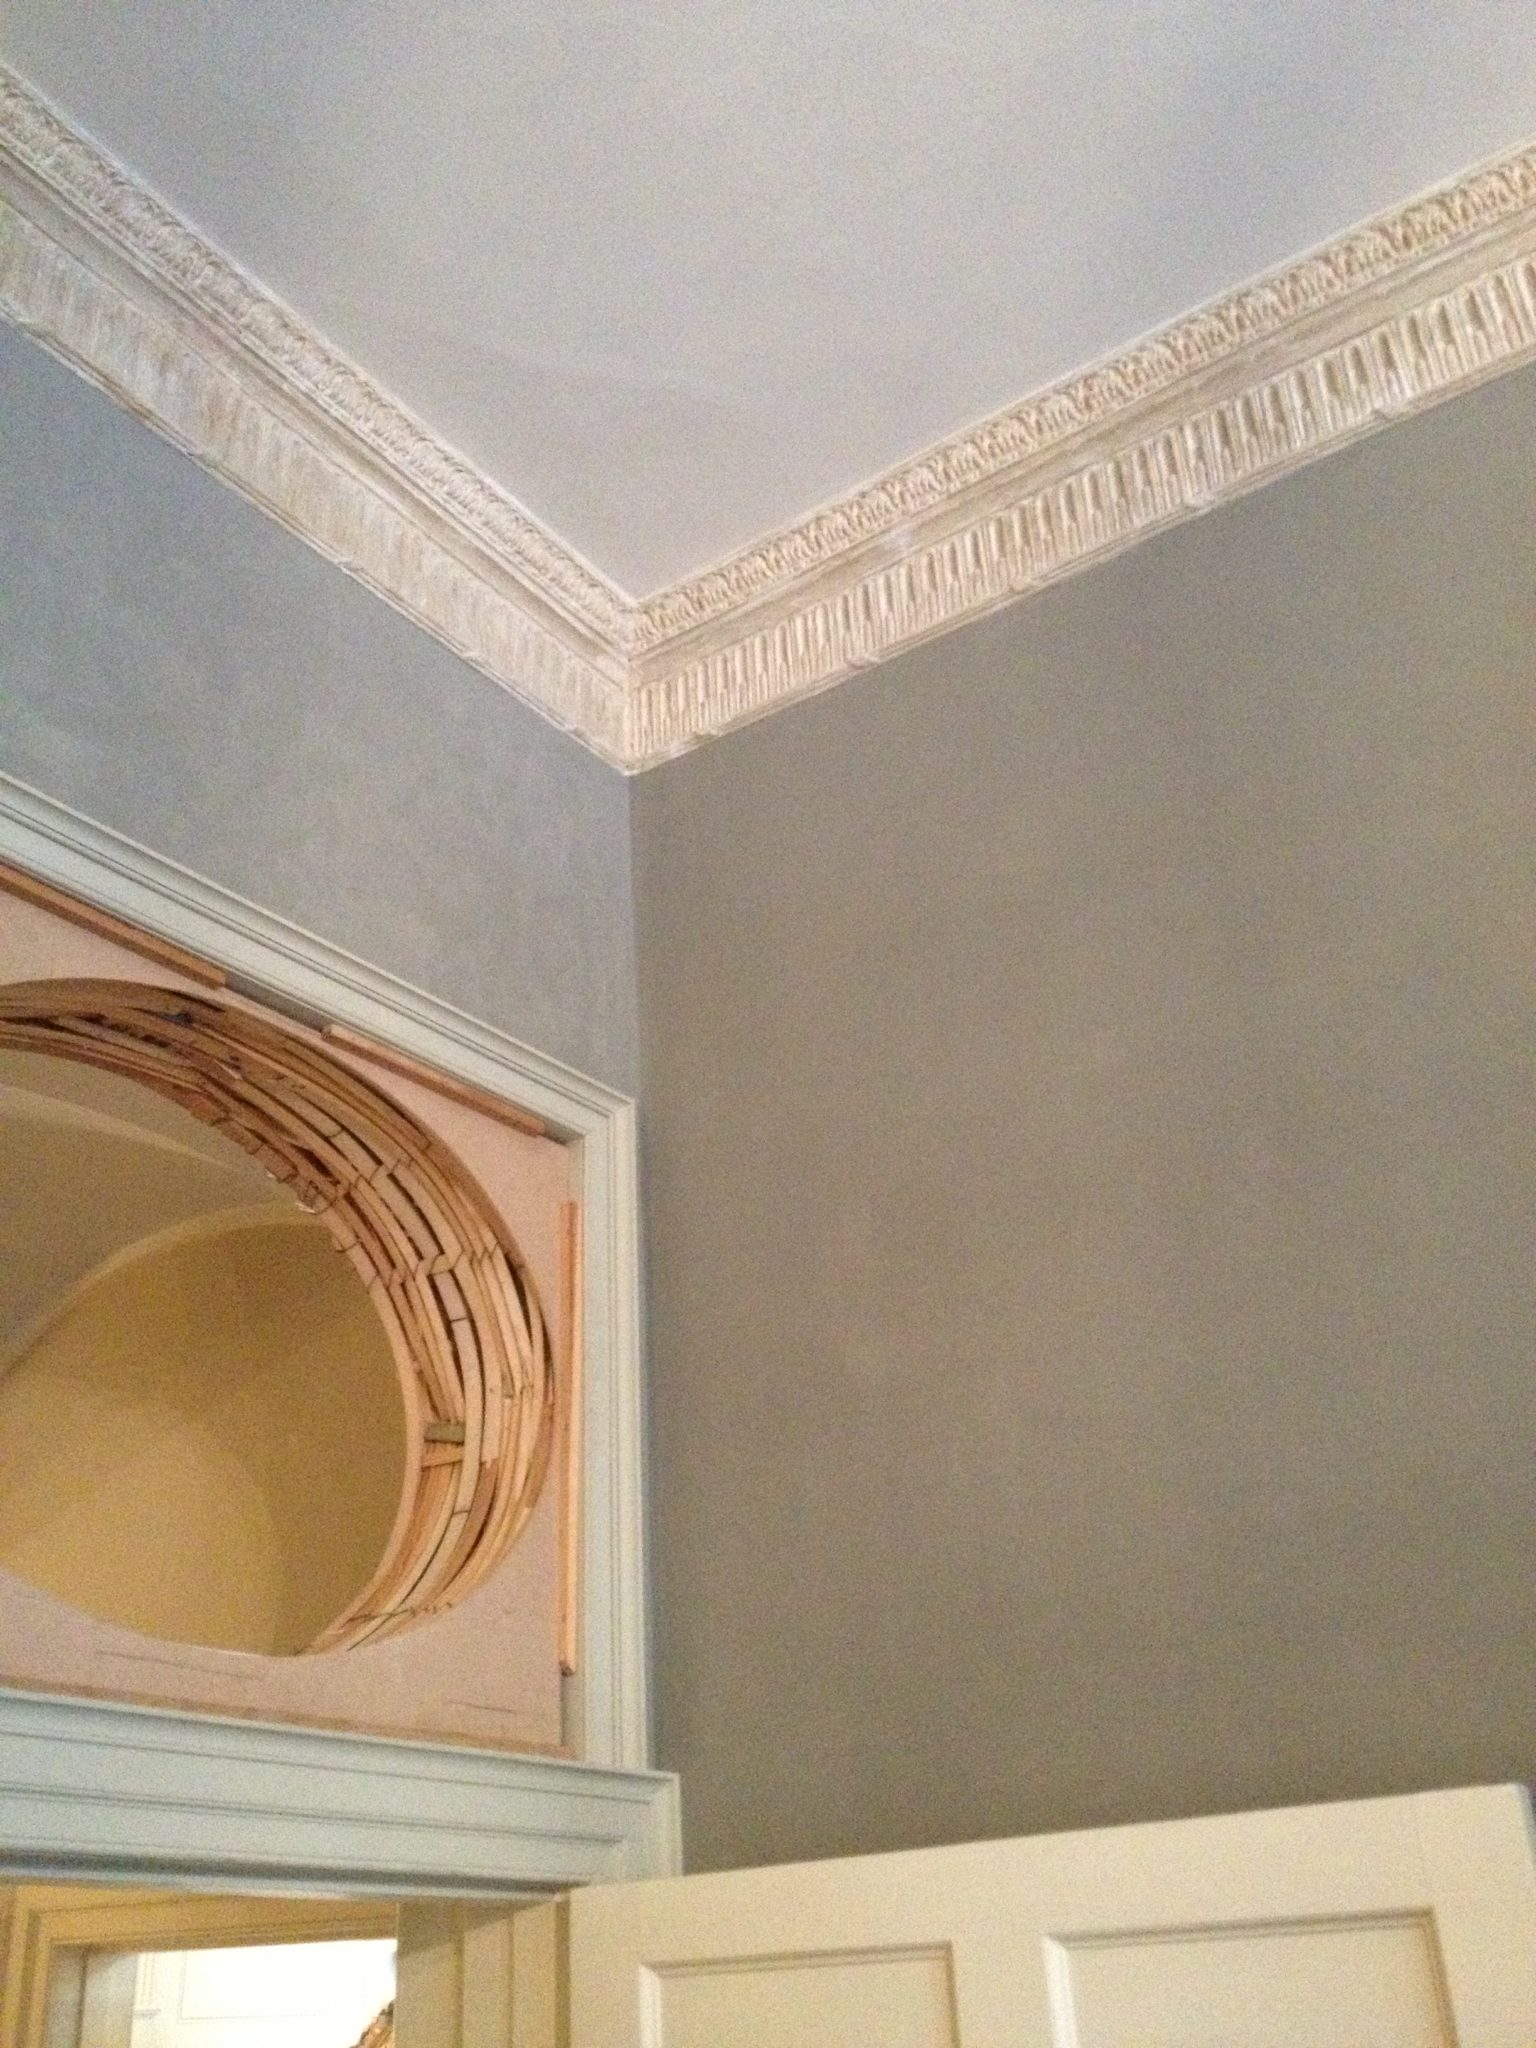 Fanlight construction and stripped back cornice